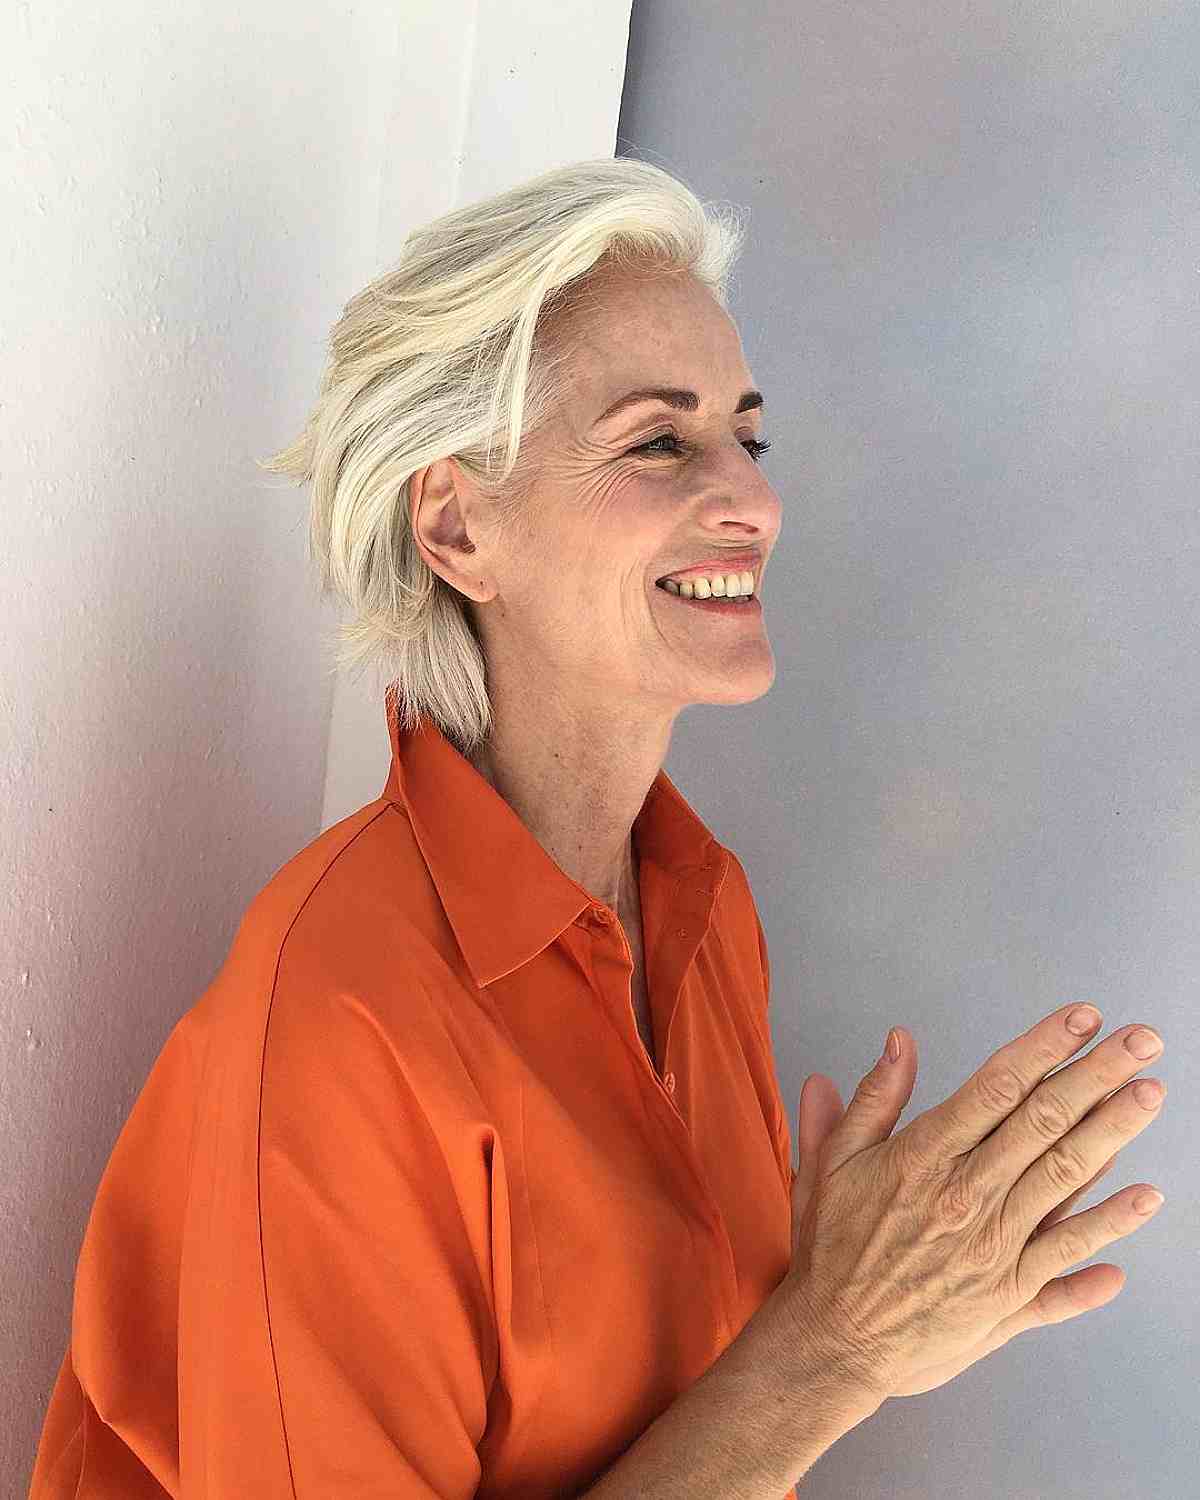 Short Swept Back Feathered Hair for Women 50 and Over